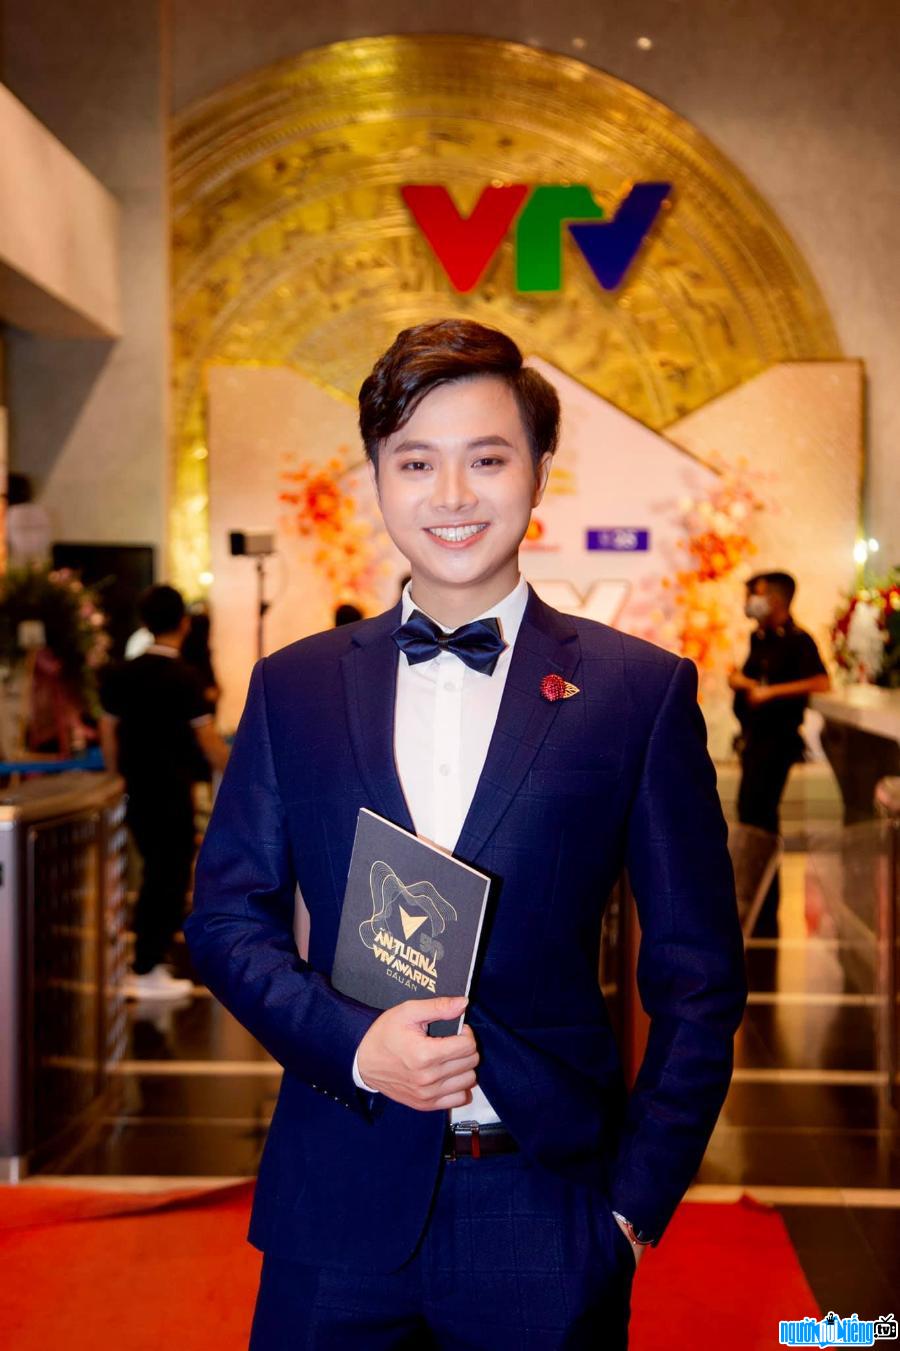  MC Duy Duong is a talented young MC of Vietnam Television